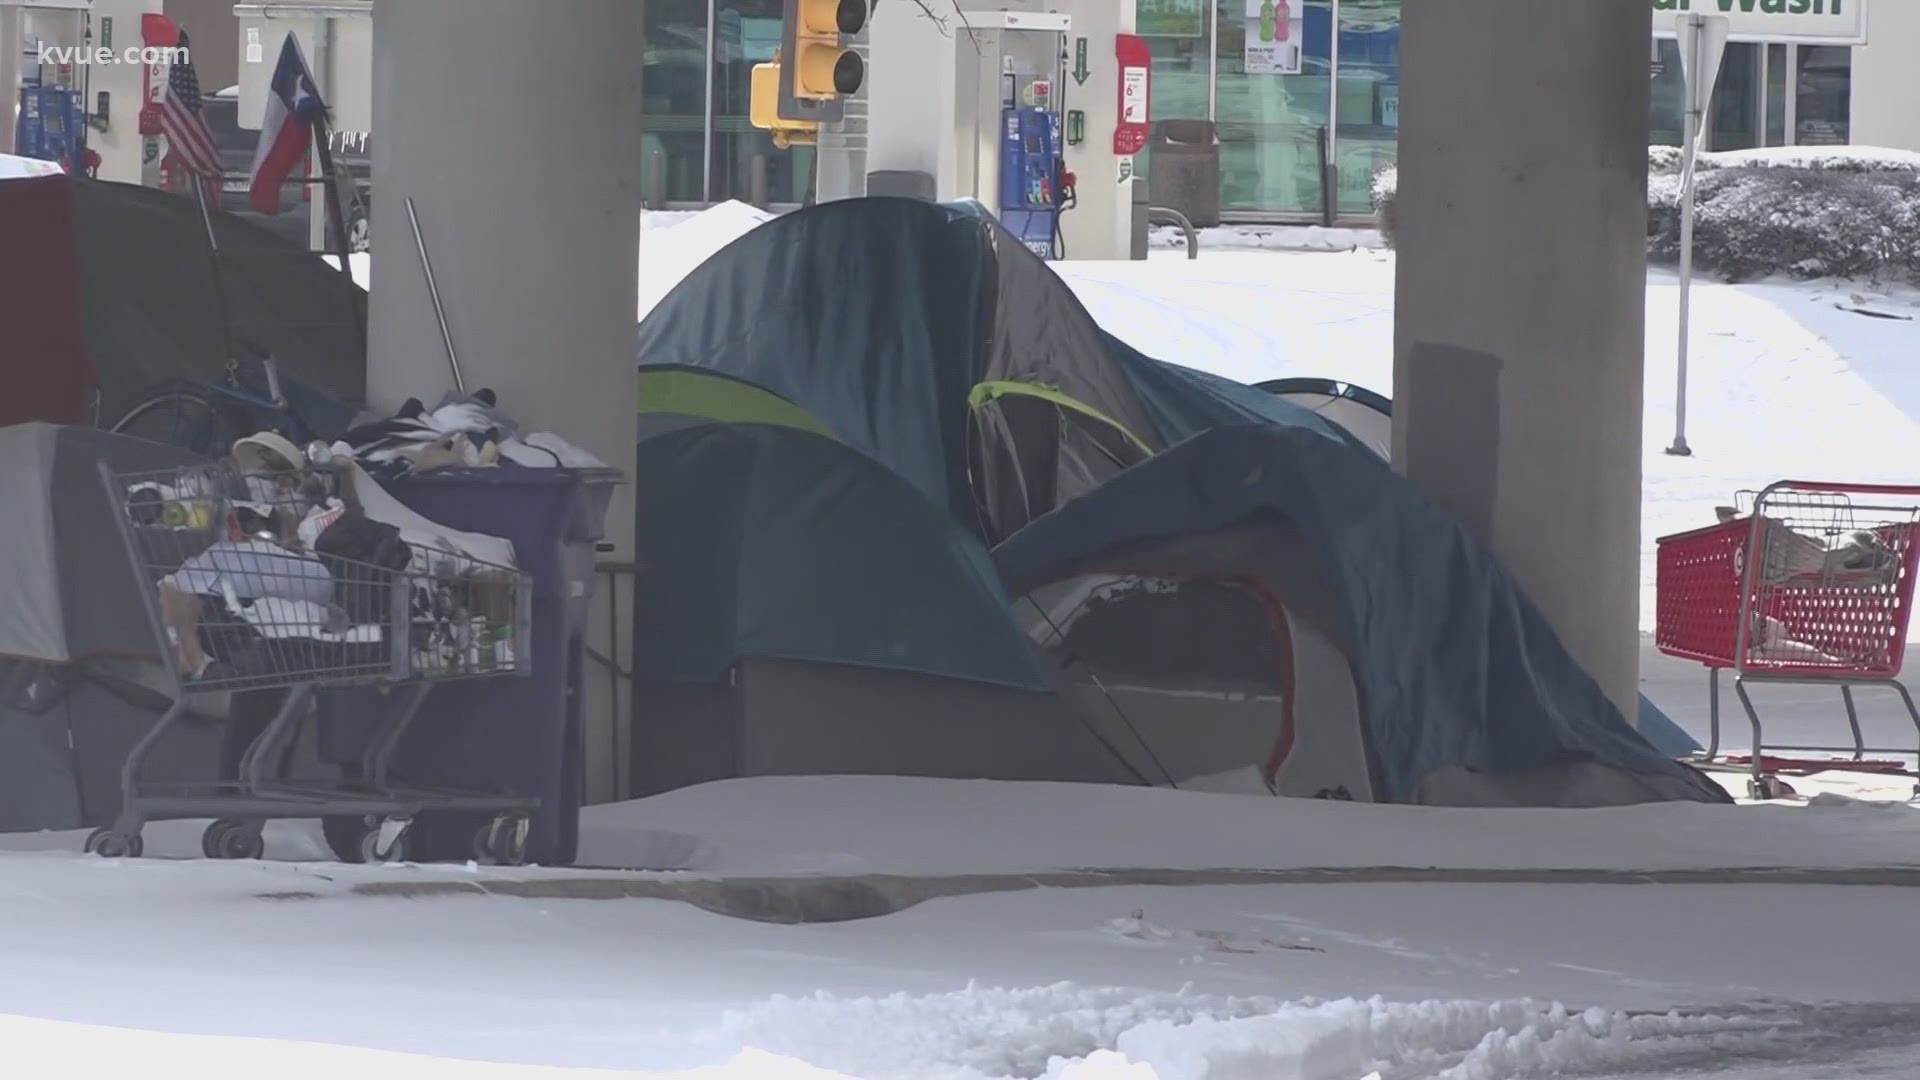 When severe winter weather comes, people need to get off the street fast. KVUE's Molly Oak spoke with a homeless service provider.